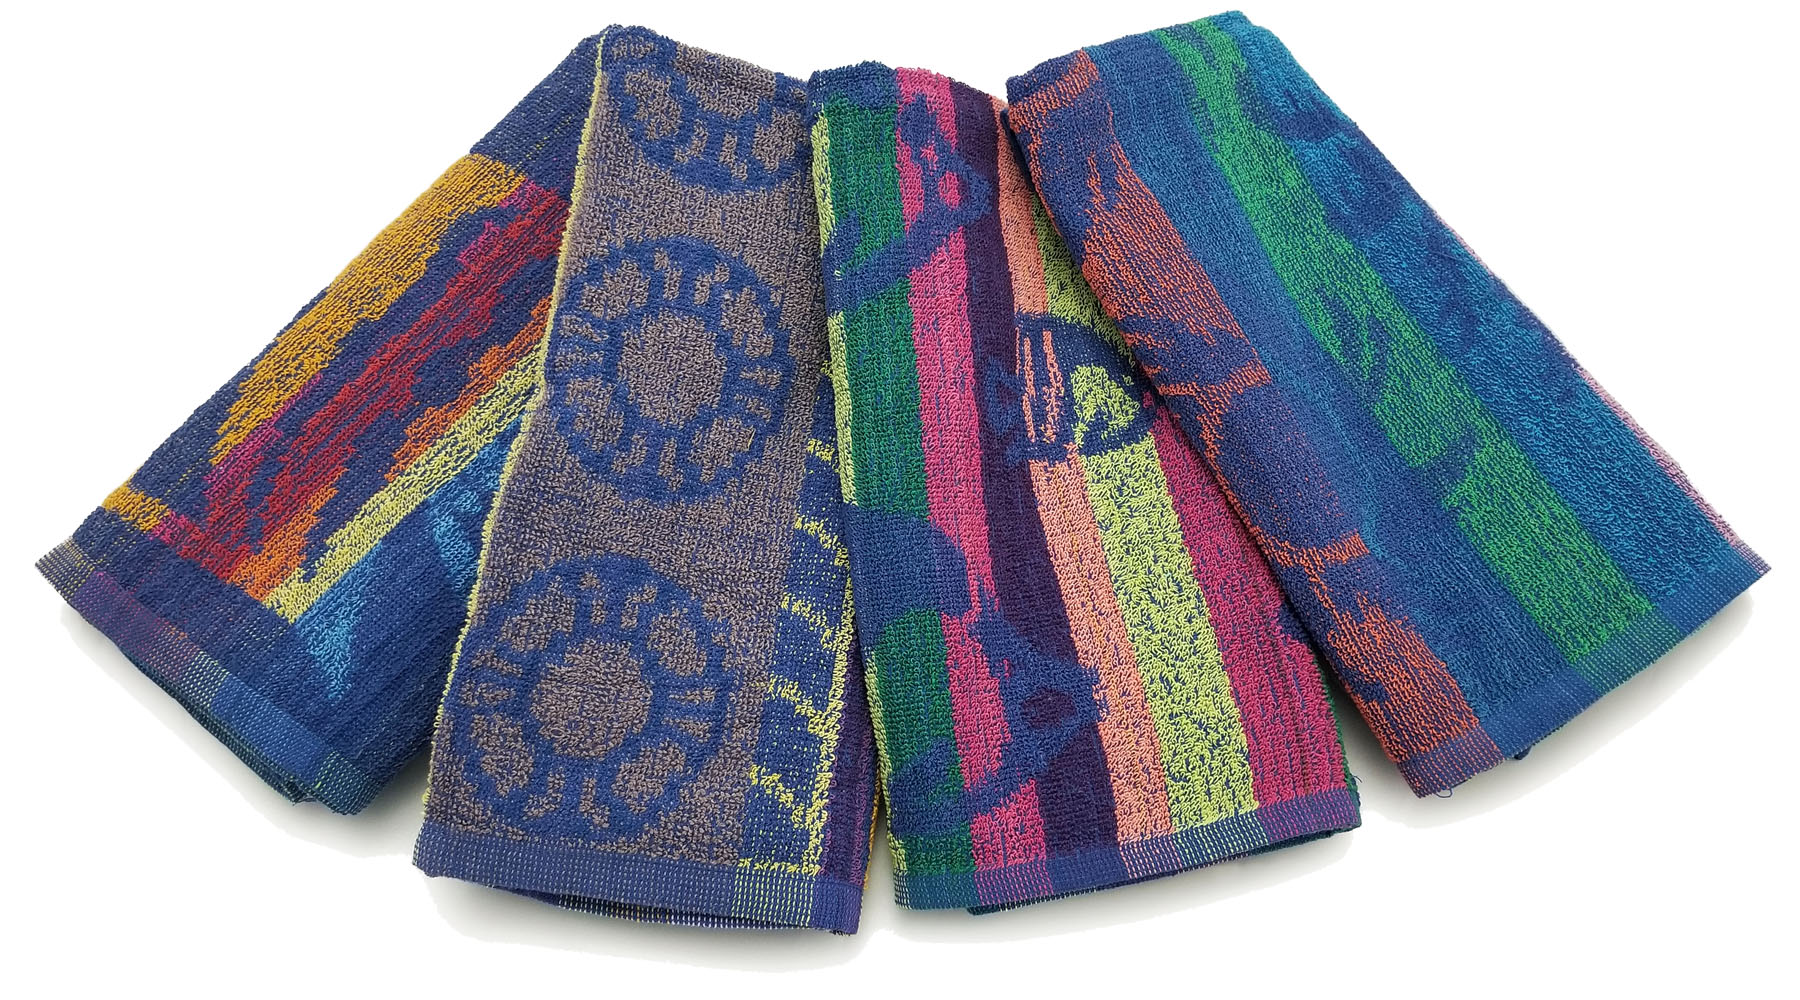 EMBROIDERED 29x59 Lightweight Economy Jacquard Assorted Design Towels. 100% Cotton. Low cost with colored varying colored designs